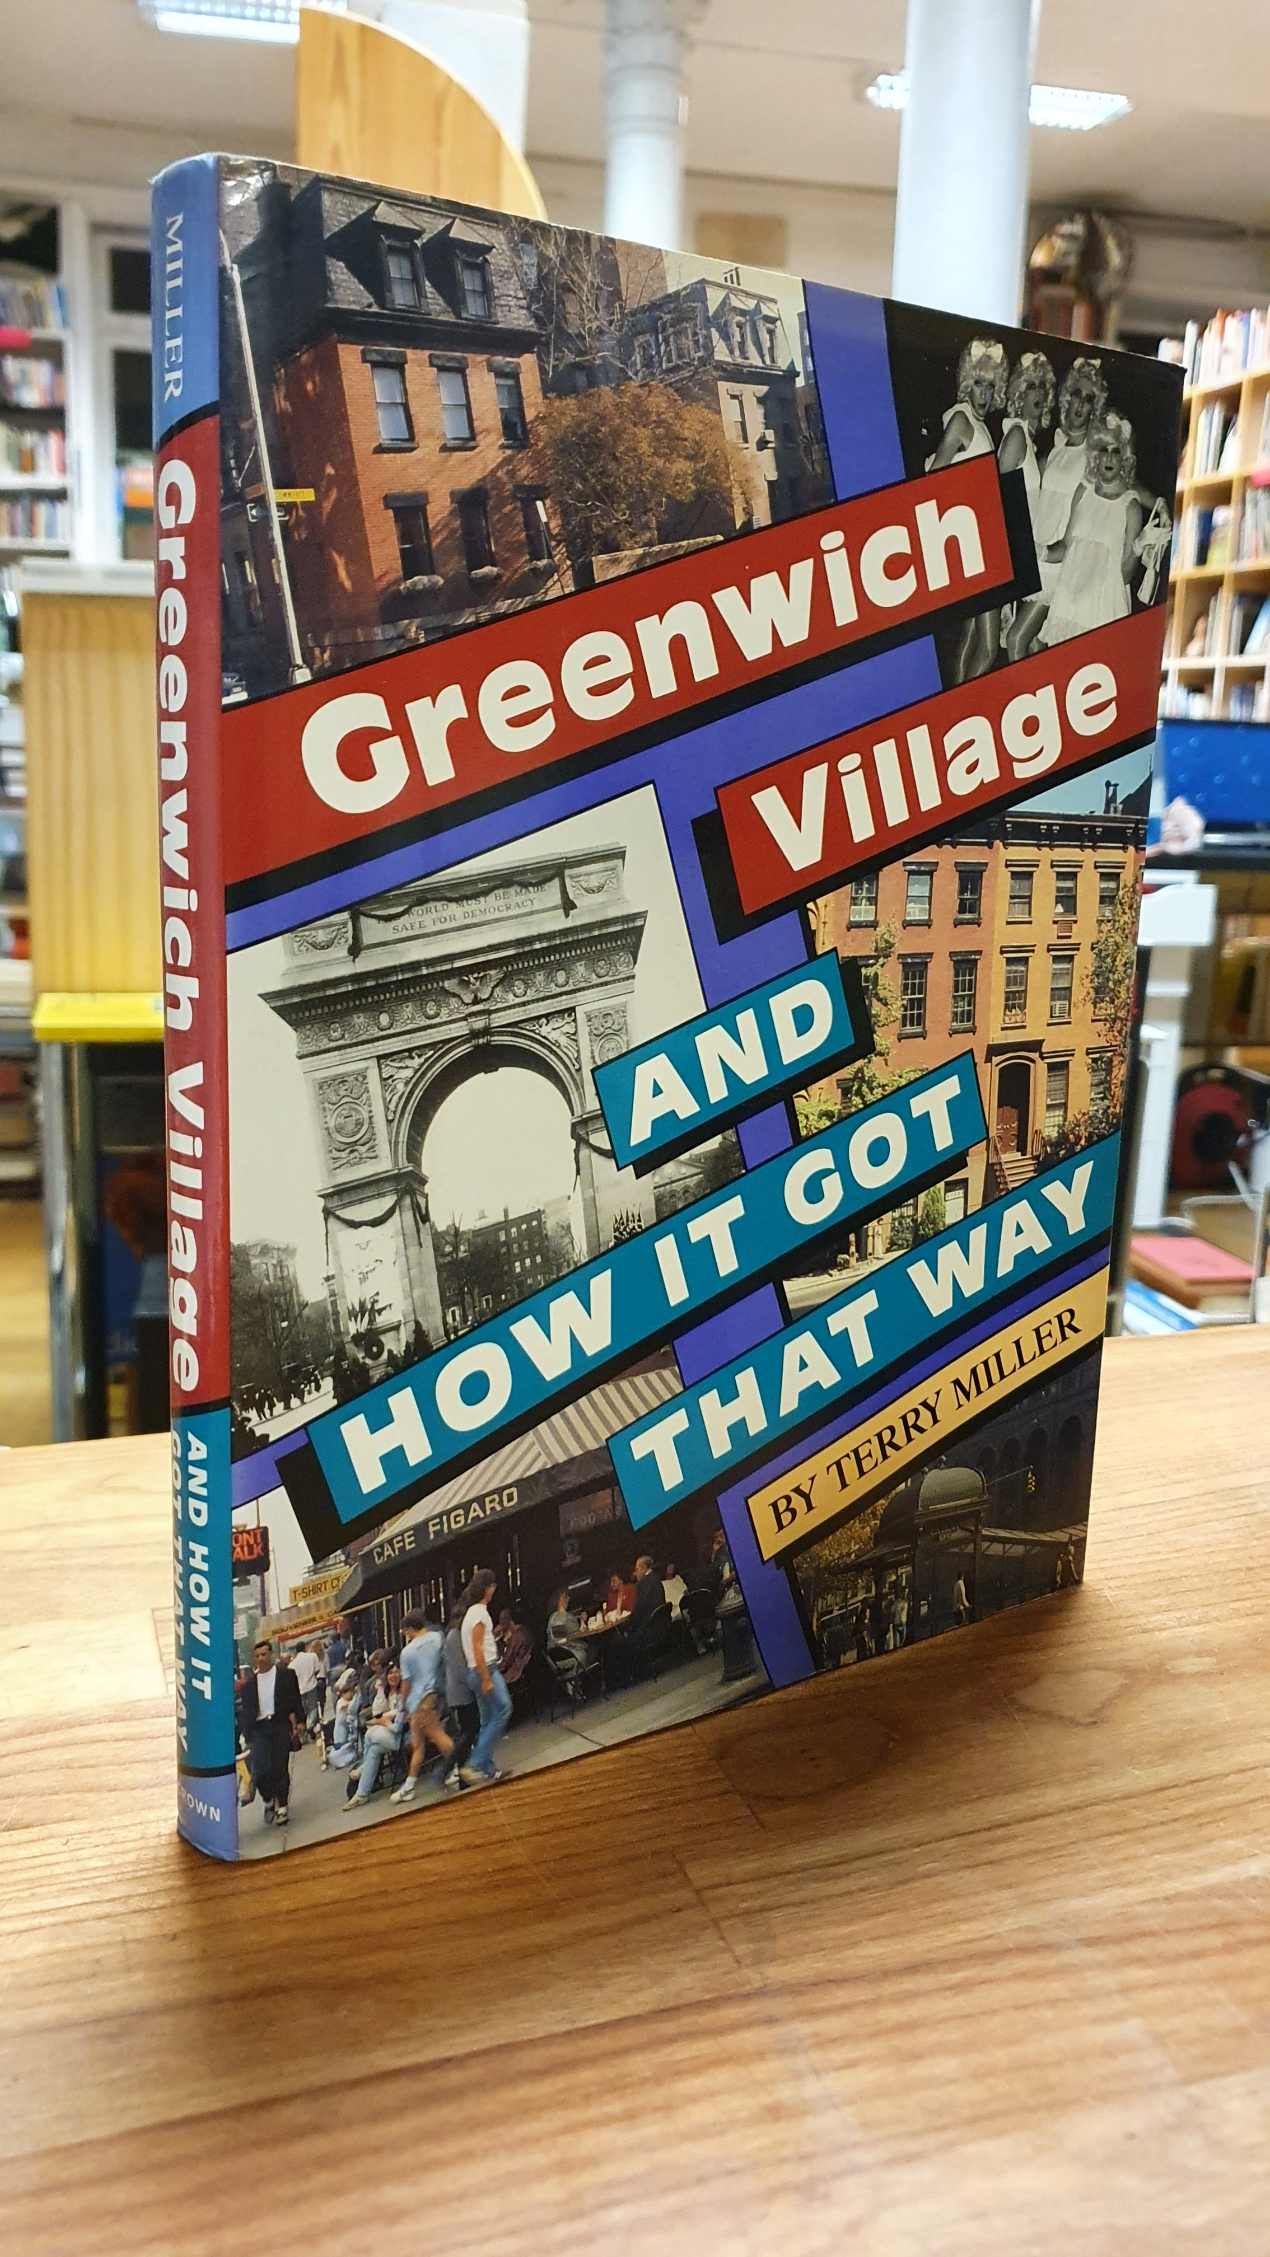 Greenwich Village And How It Got That Way, - Miller, Terry,